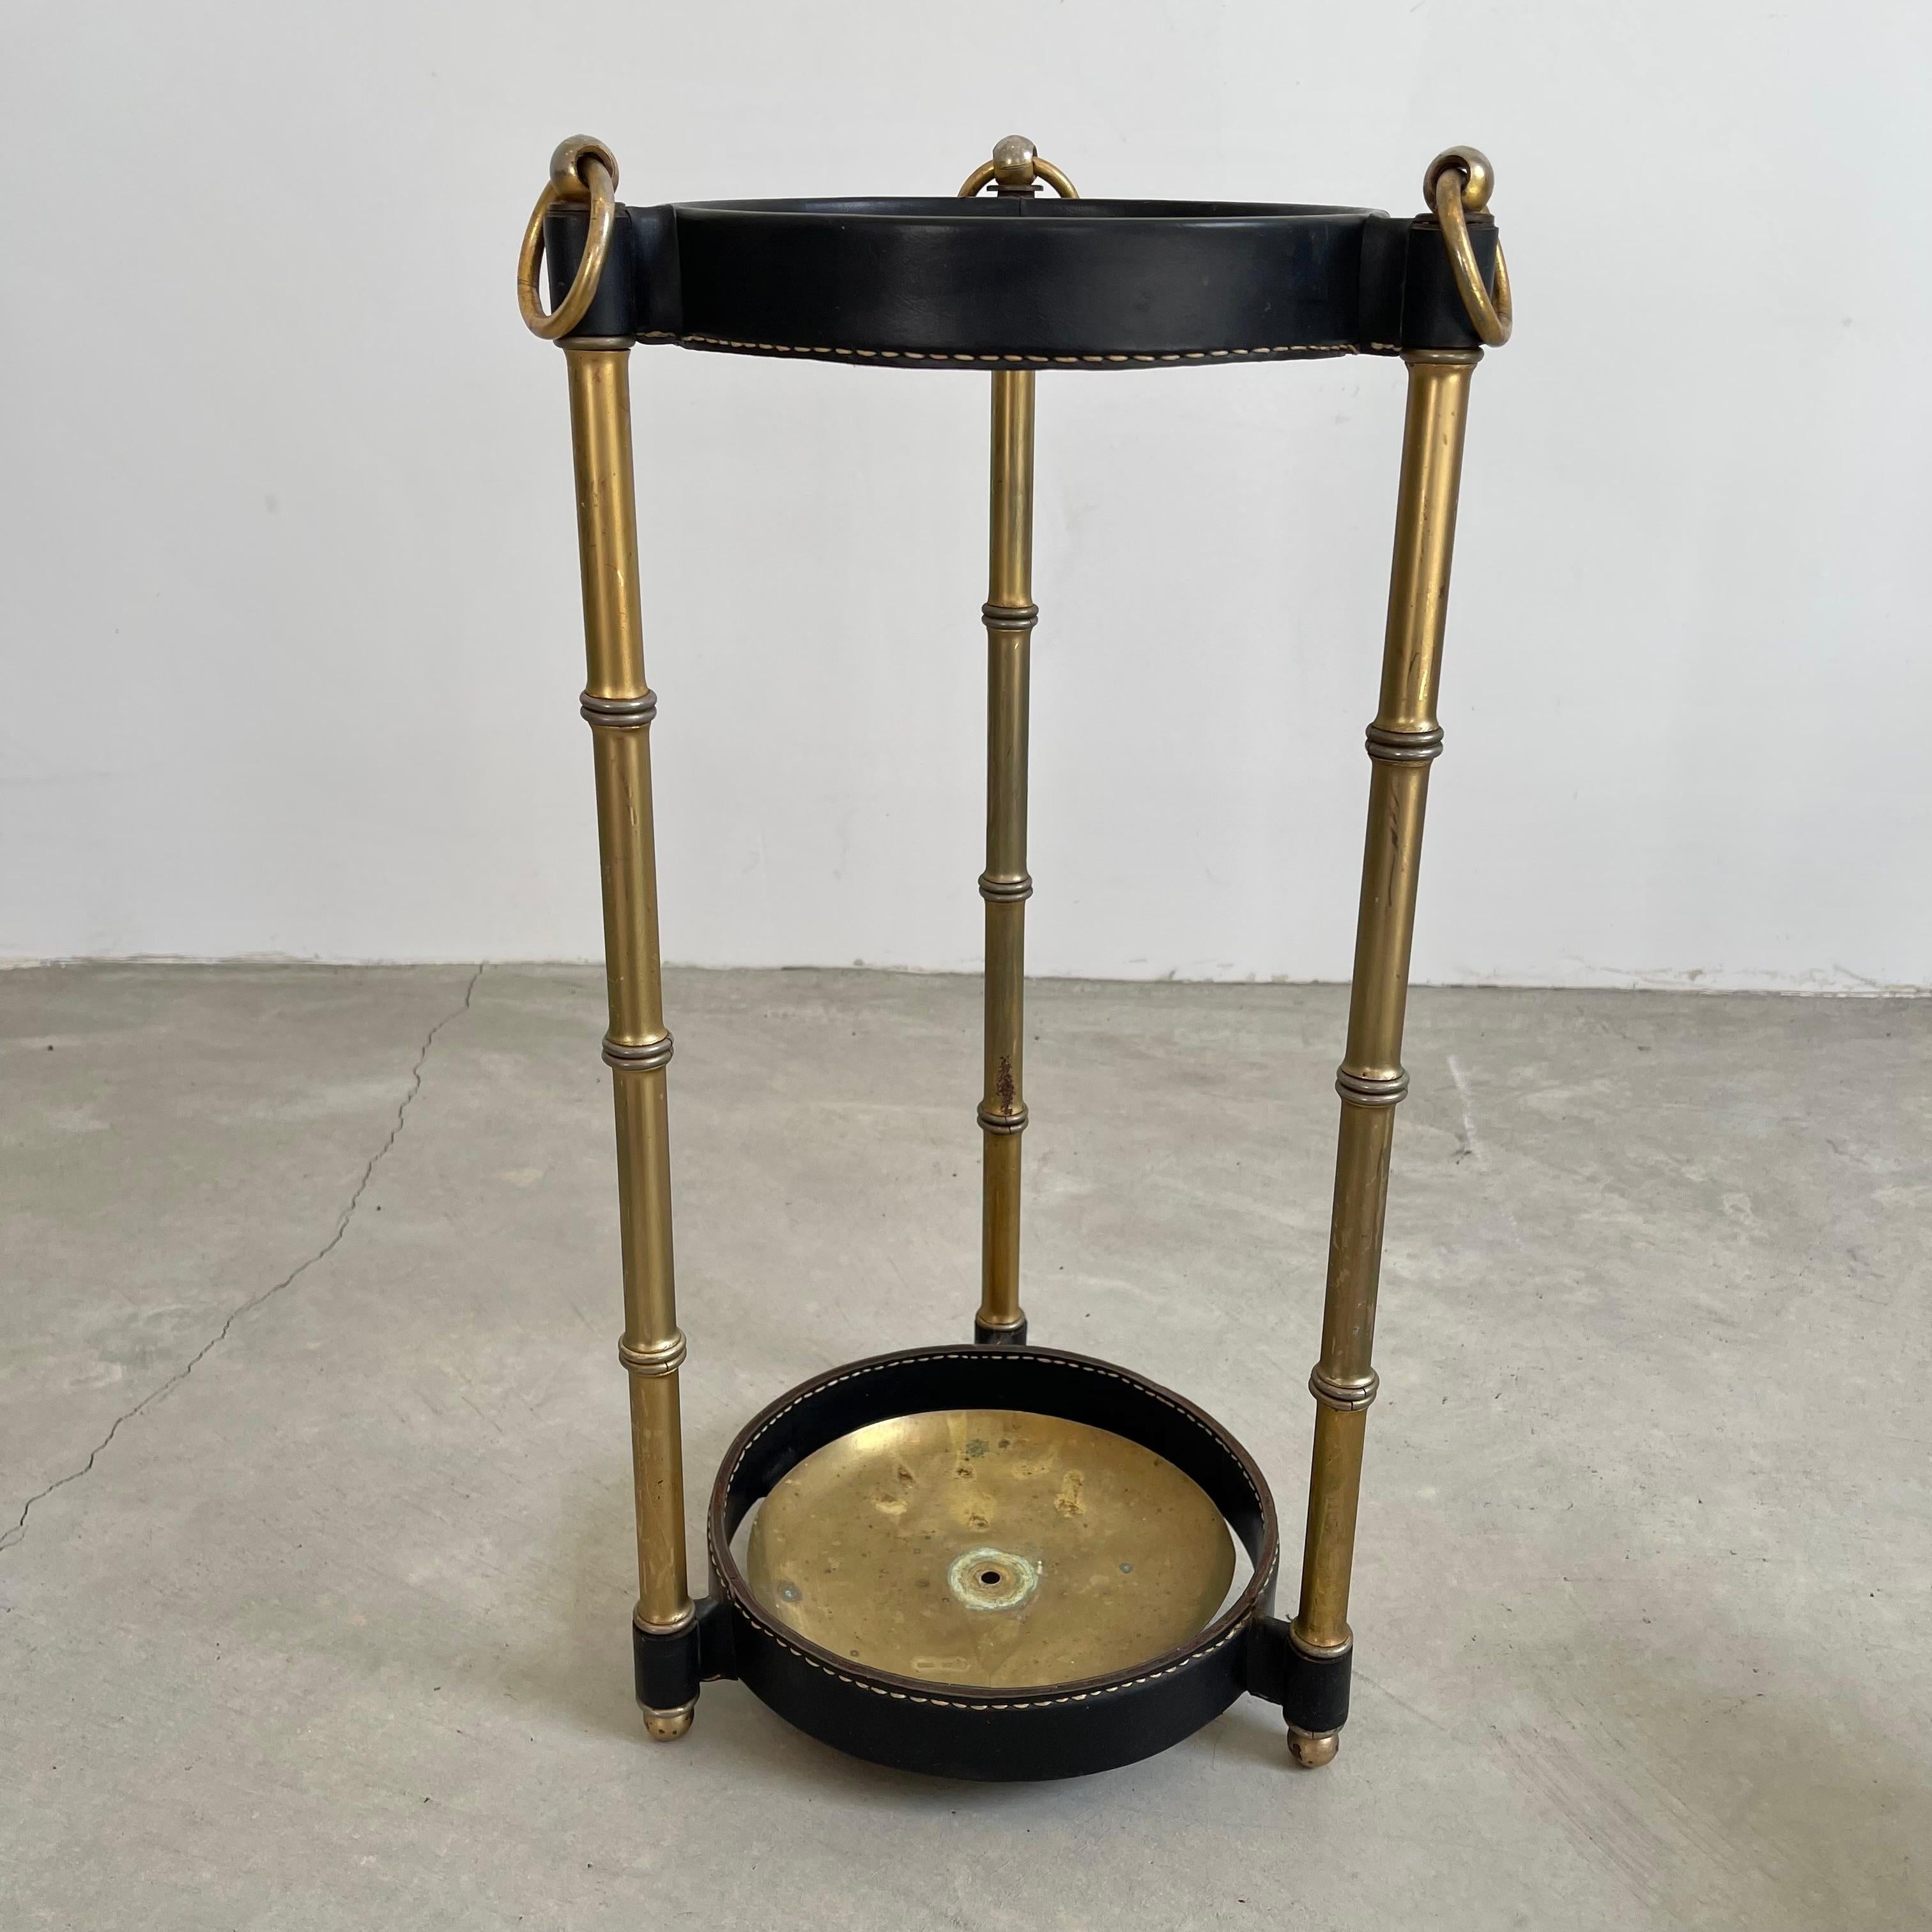 Jacques Adnet Leather and Brass Umbrella Stand, 1950s For Sale 9